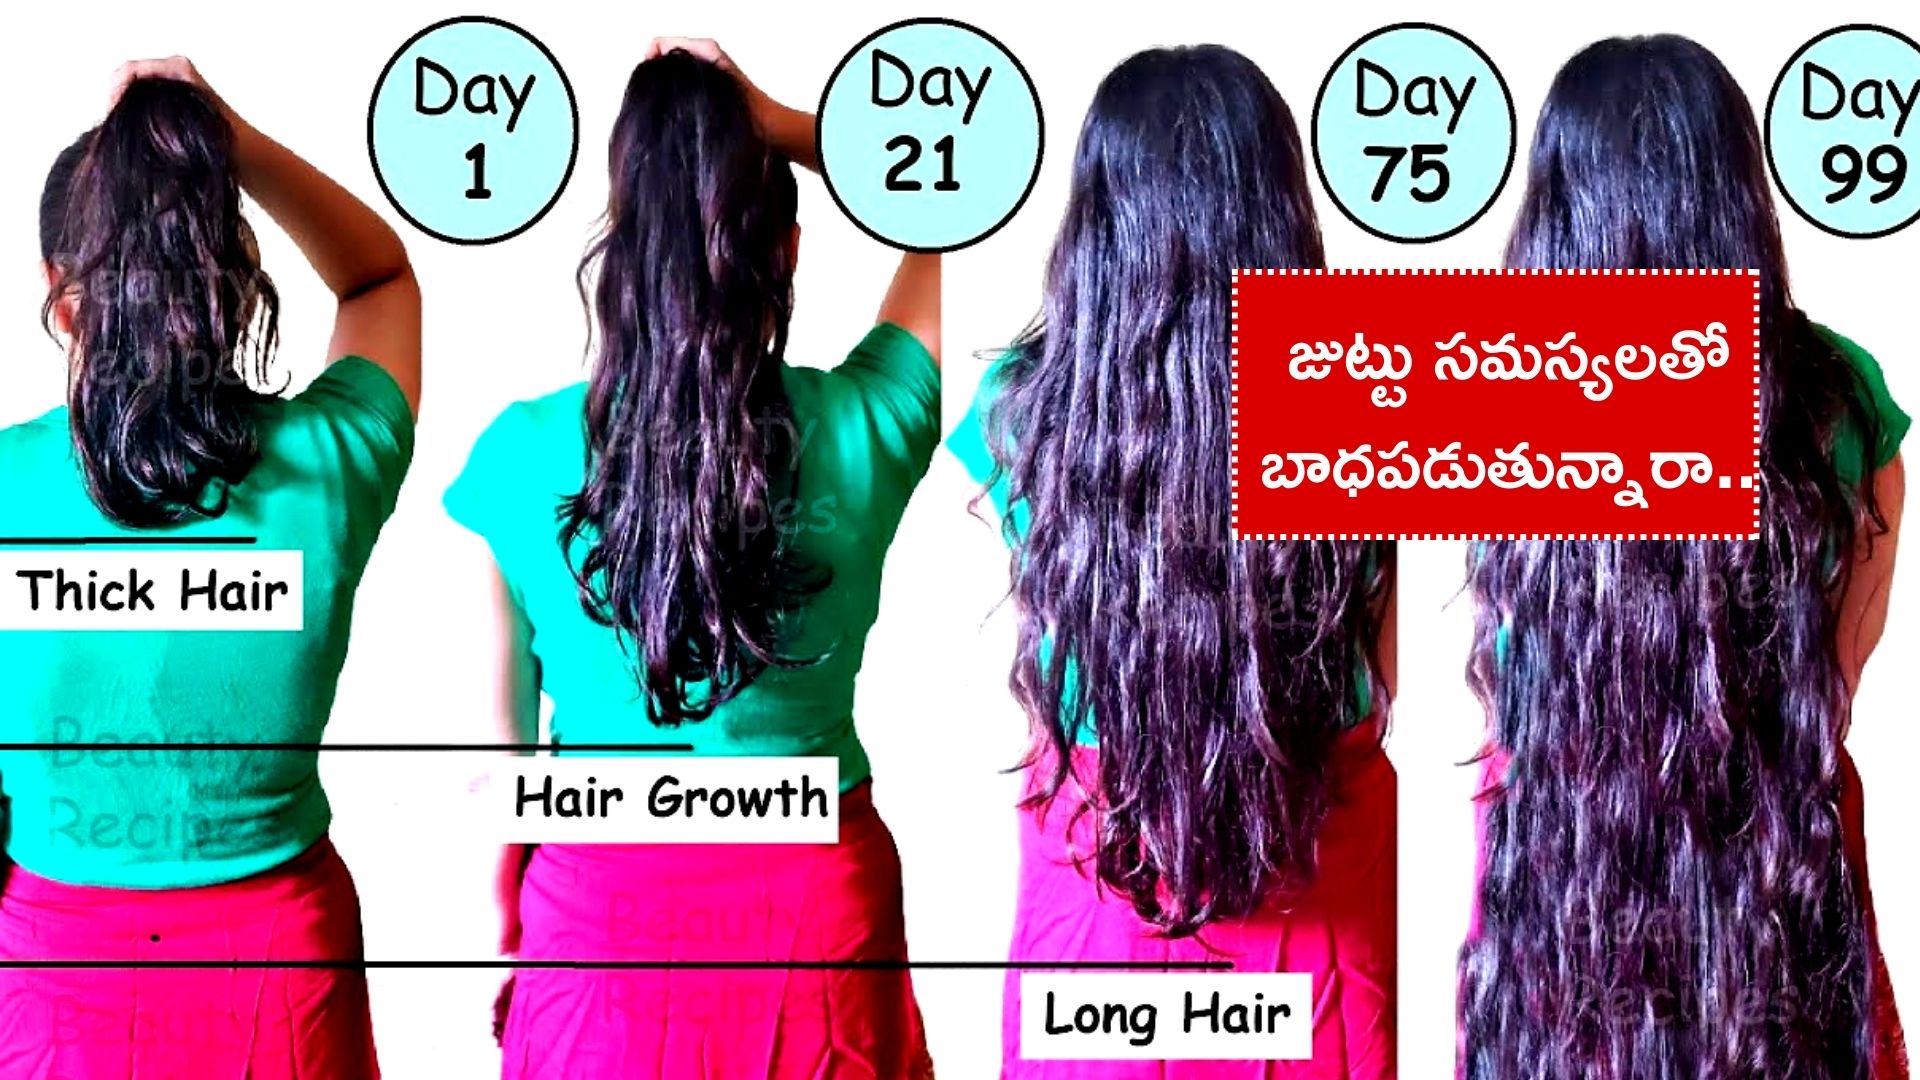 Hair Care Tips: If You Suffer From Hair Problems Do Not Use Hair  Conditioners And Chemical Products | Hair Care Tips: జుట్టు సమస్యలతో  బాధపడుతున్నారా.. అయితే ఇలా చేయండి చాలు.. News in Telugu